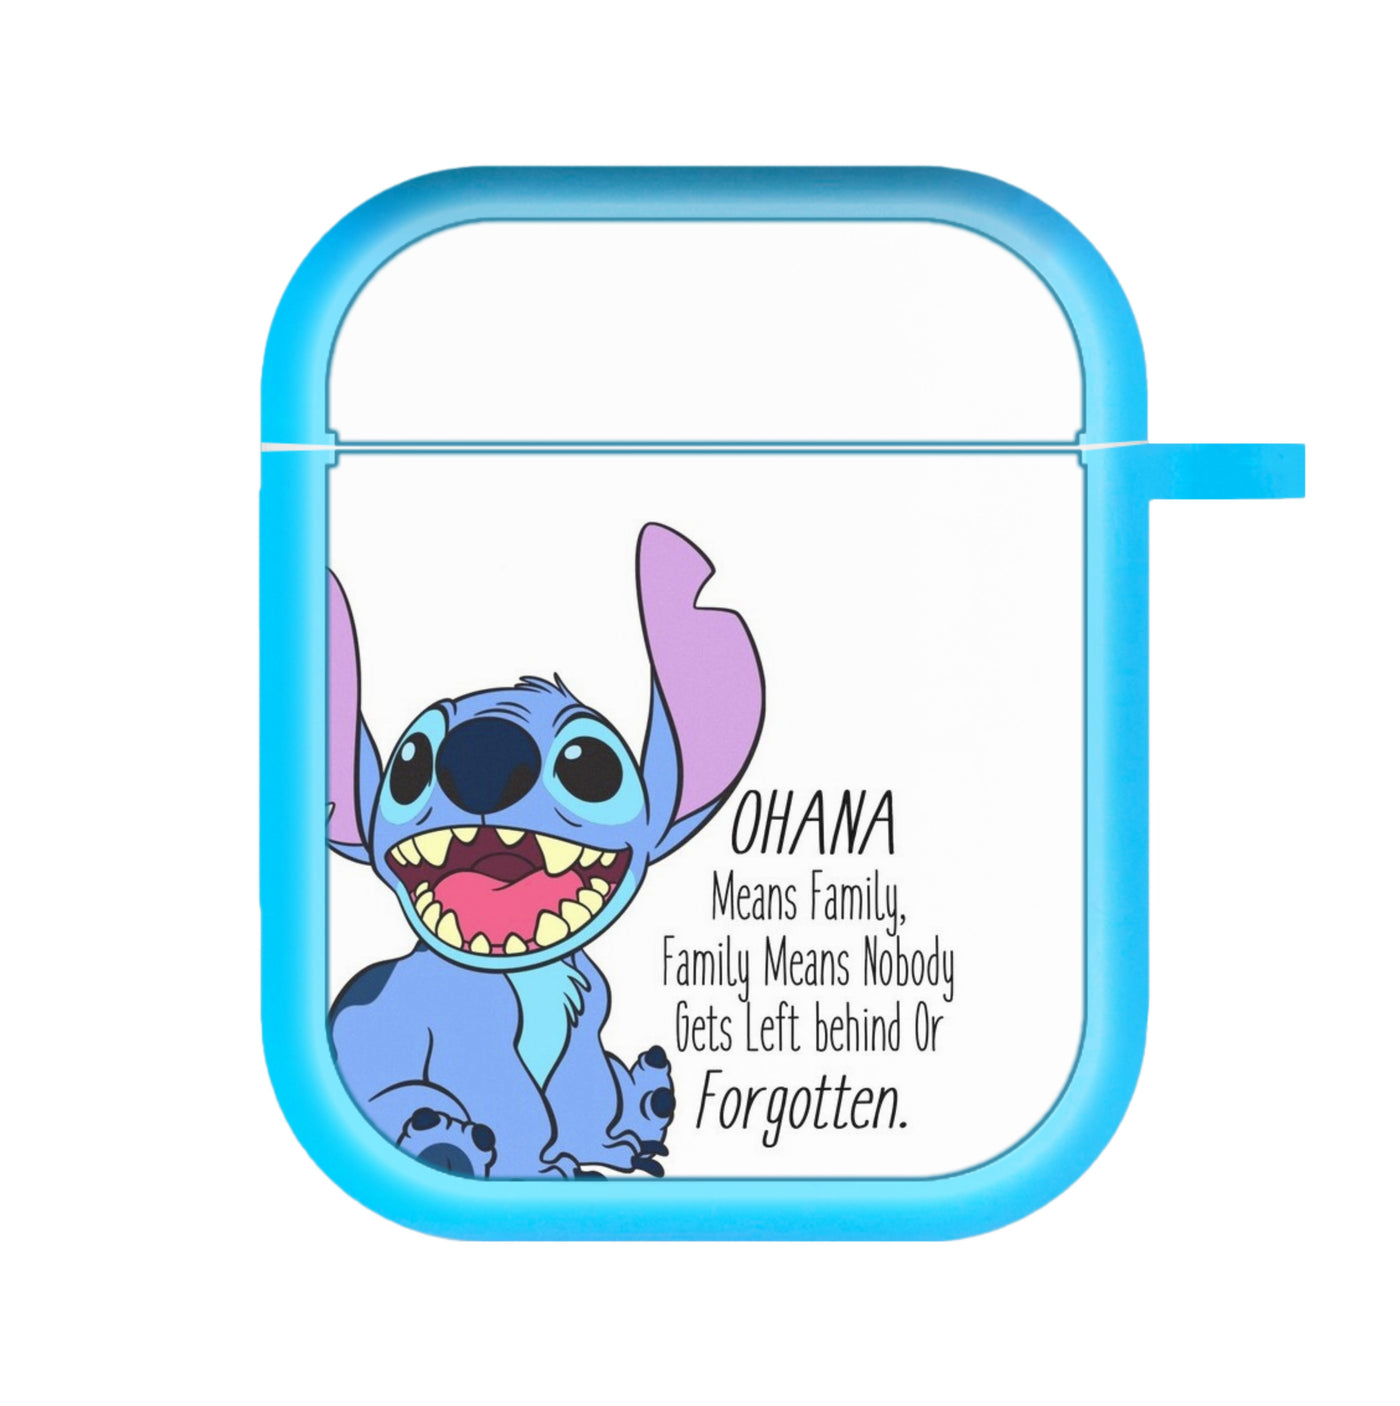 Ohana Means Family - Stitch AirPods Case